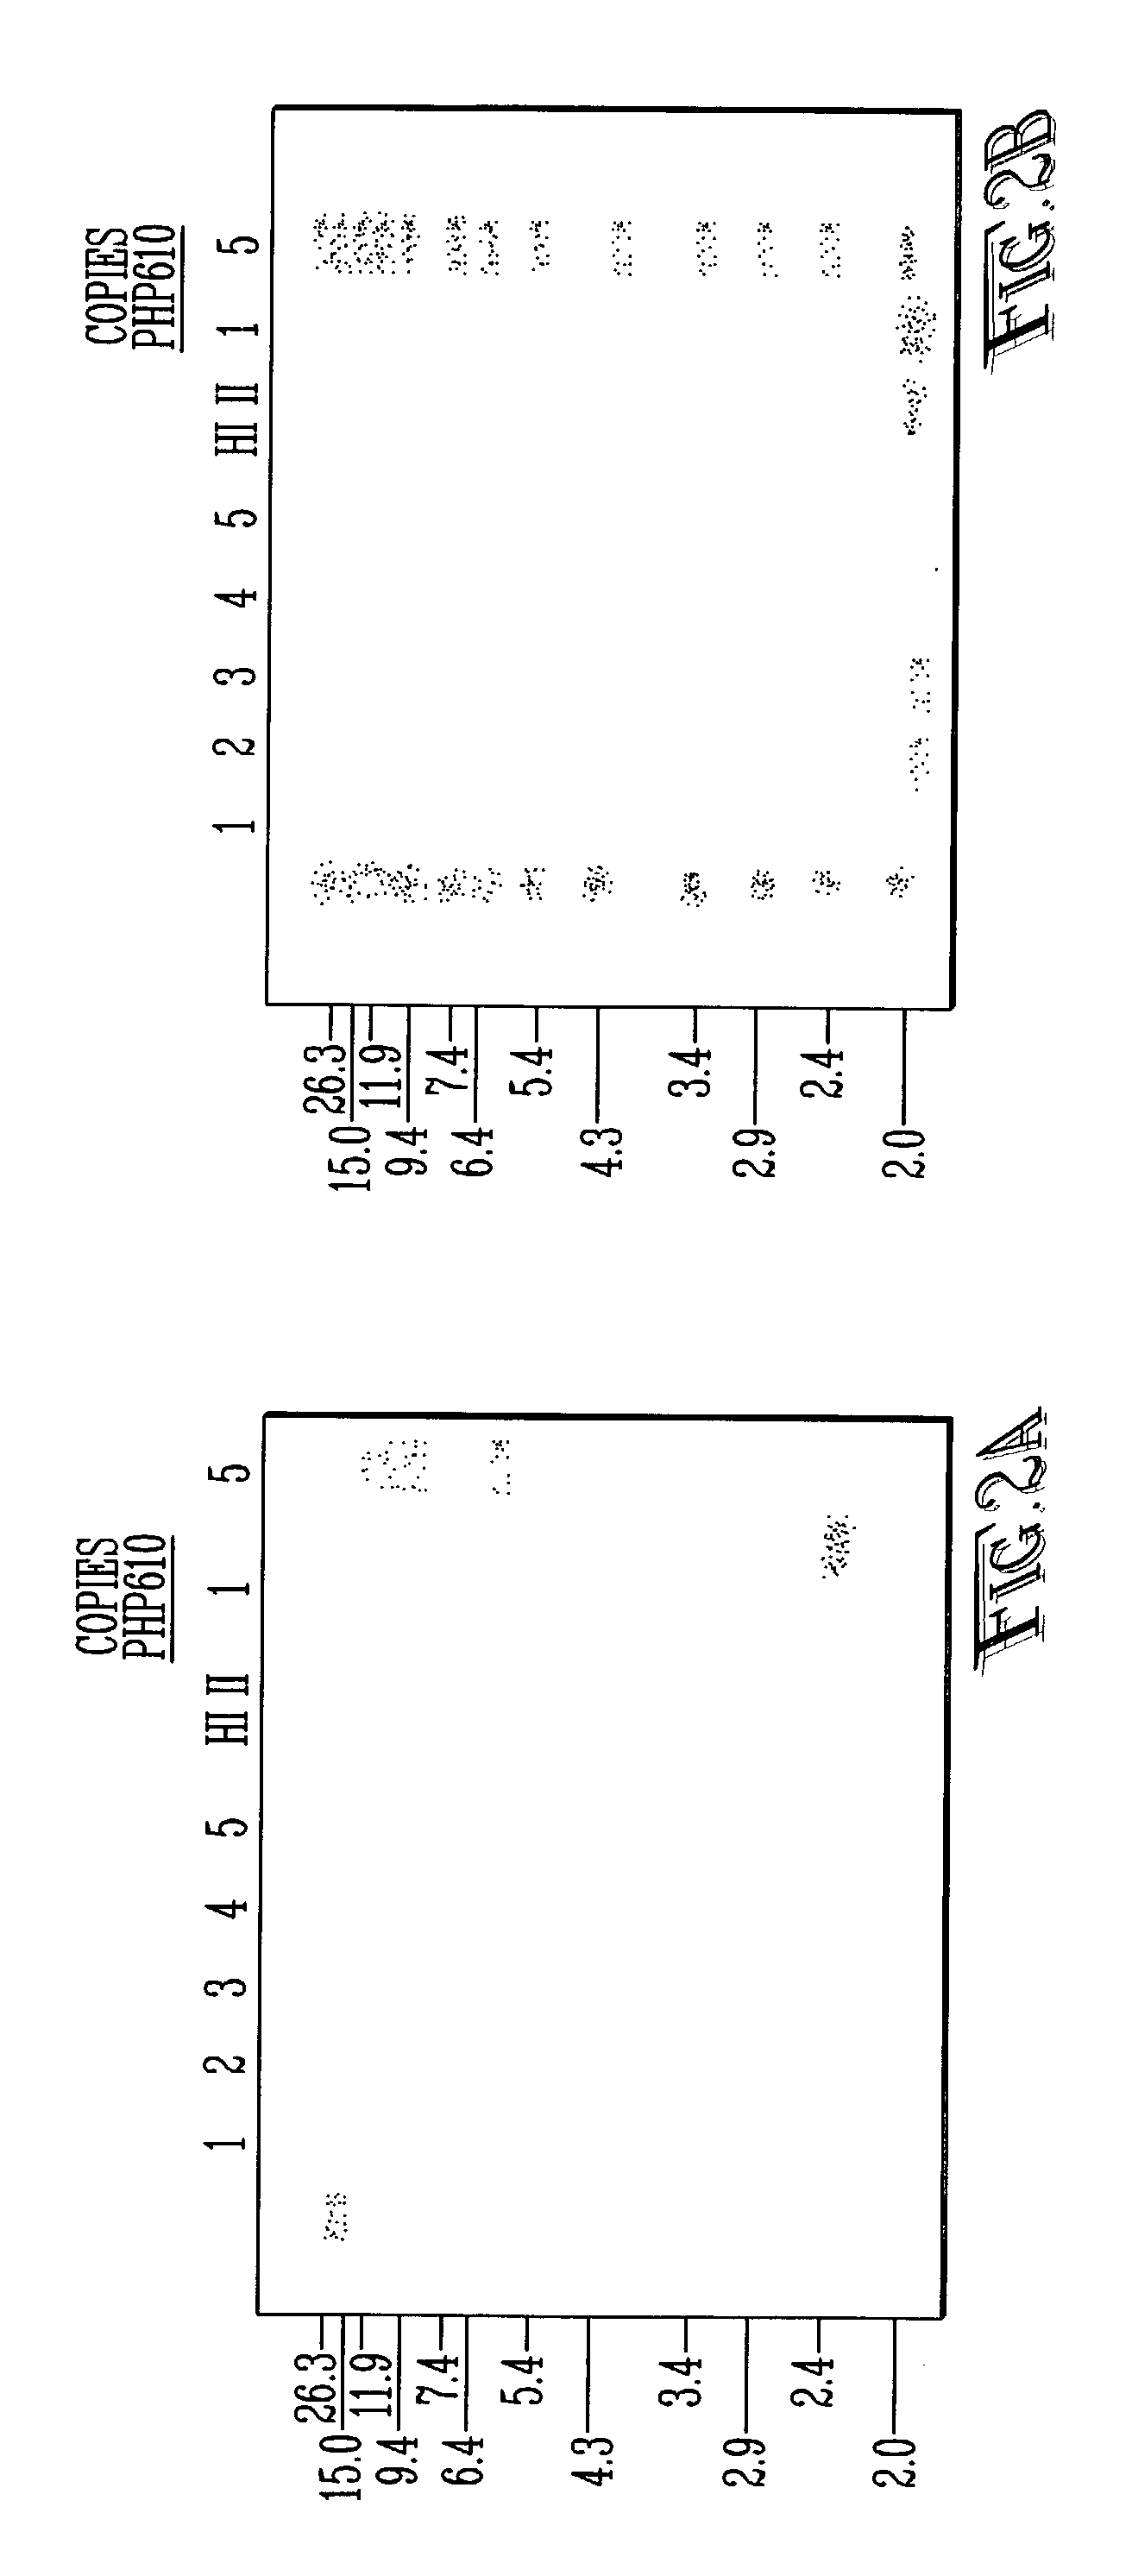 Methods of commercial production and extraction of protein from seed